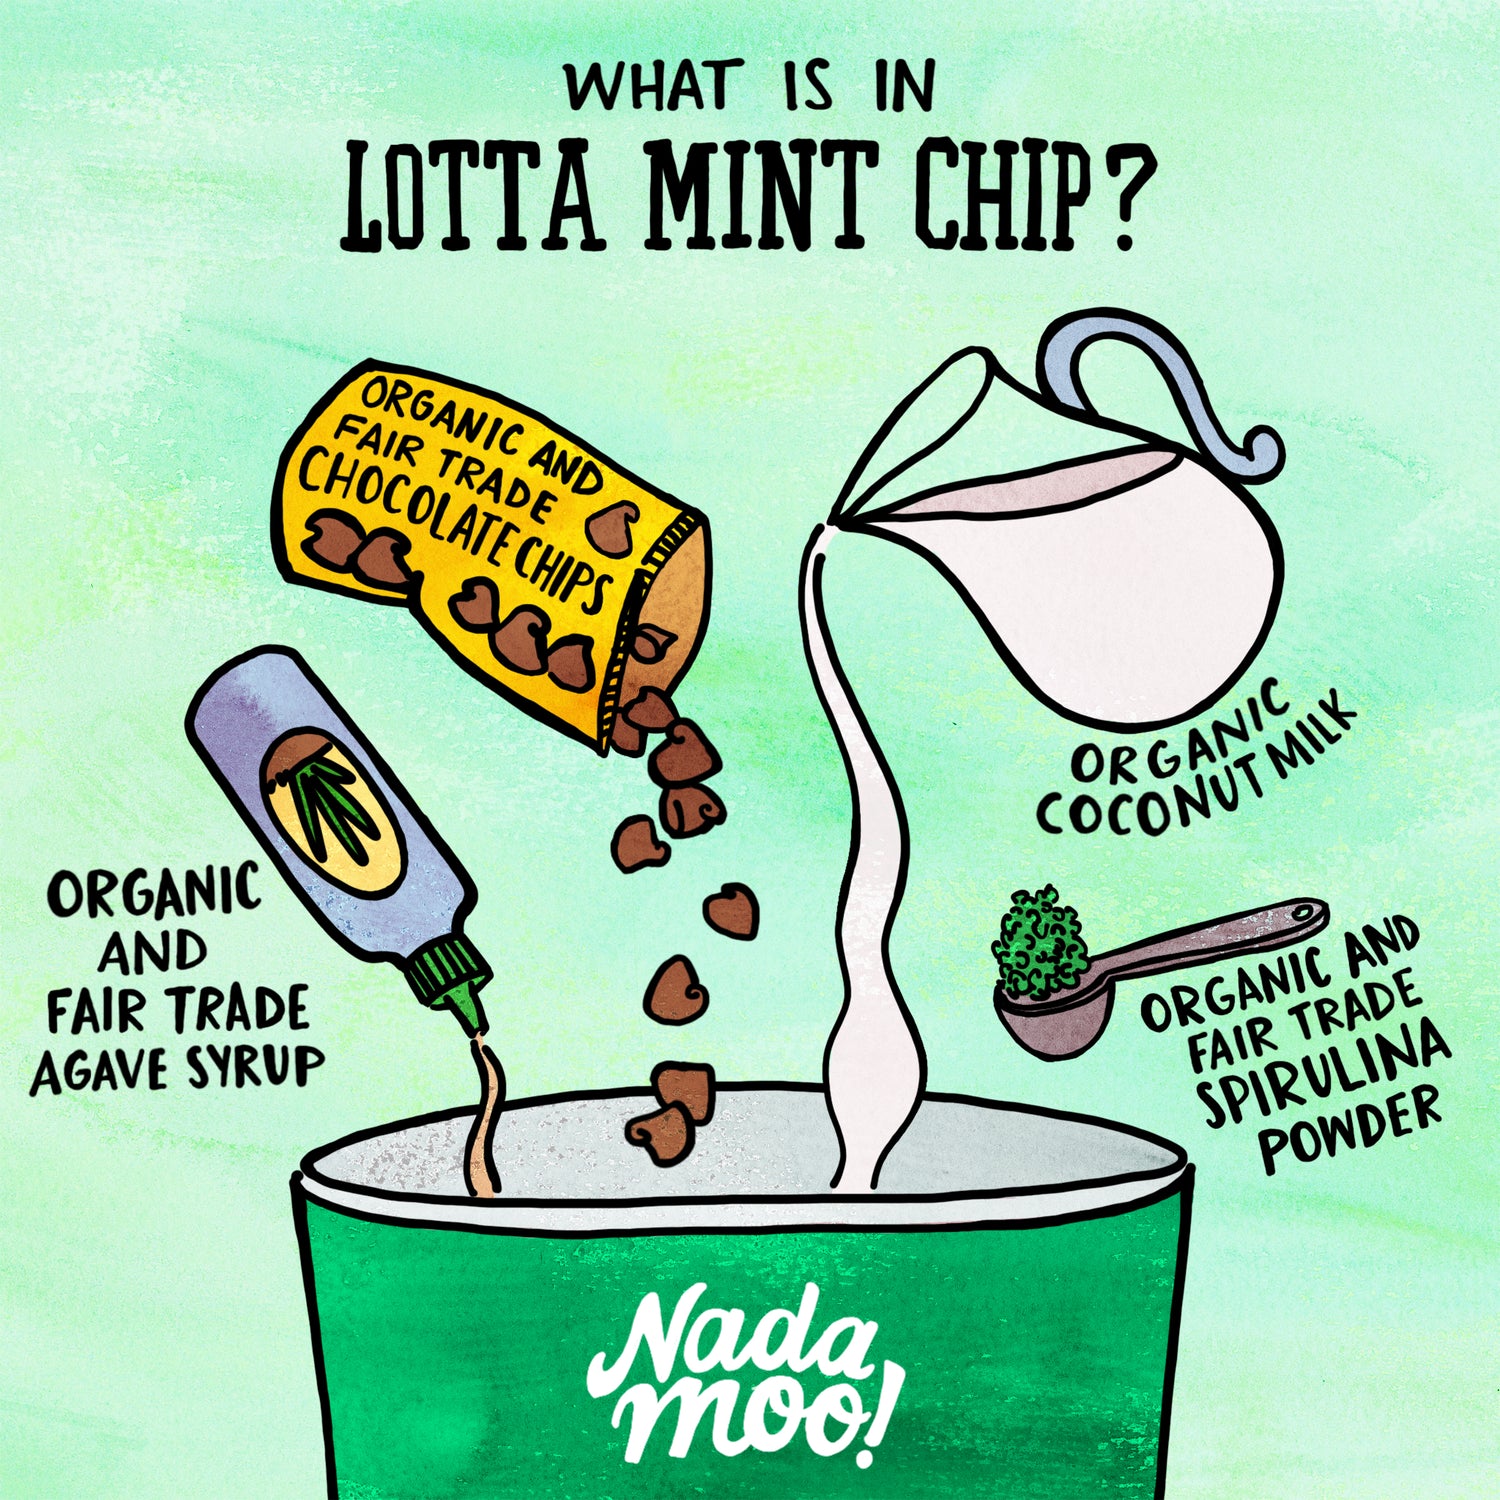 Mint green background, black words above "what is in Lotta Mint Chip?" Lower half of image shows top portion of ice cream pint with main ingredients pouring in from left to right: agave syrup, chocolate chips, coconut milk, spirulina.